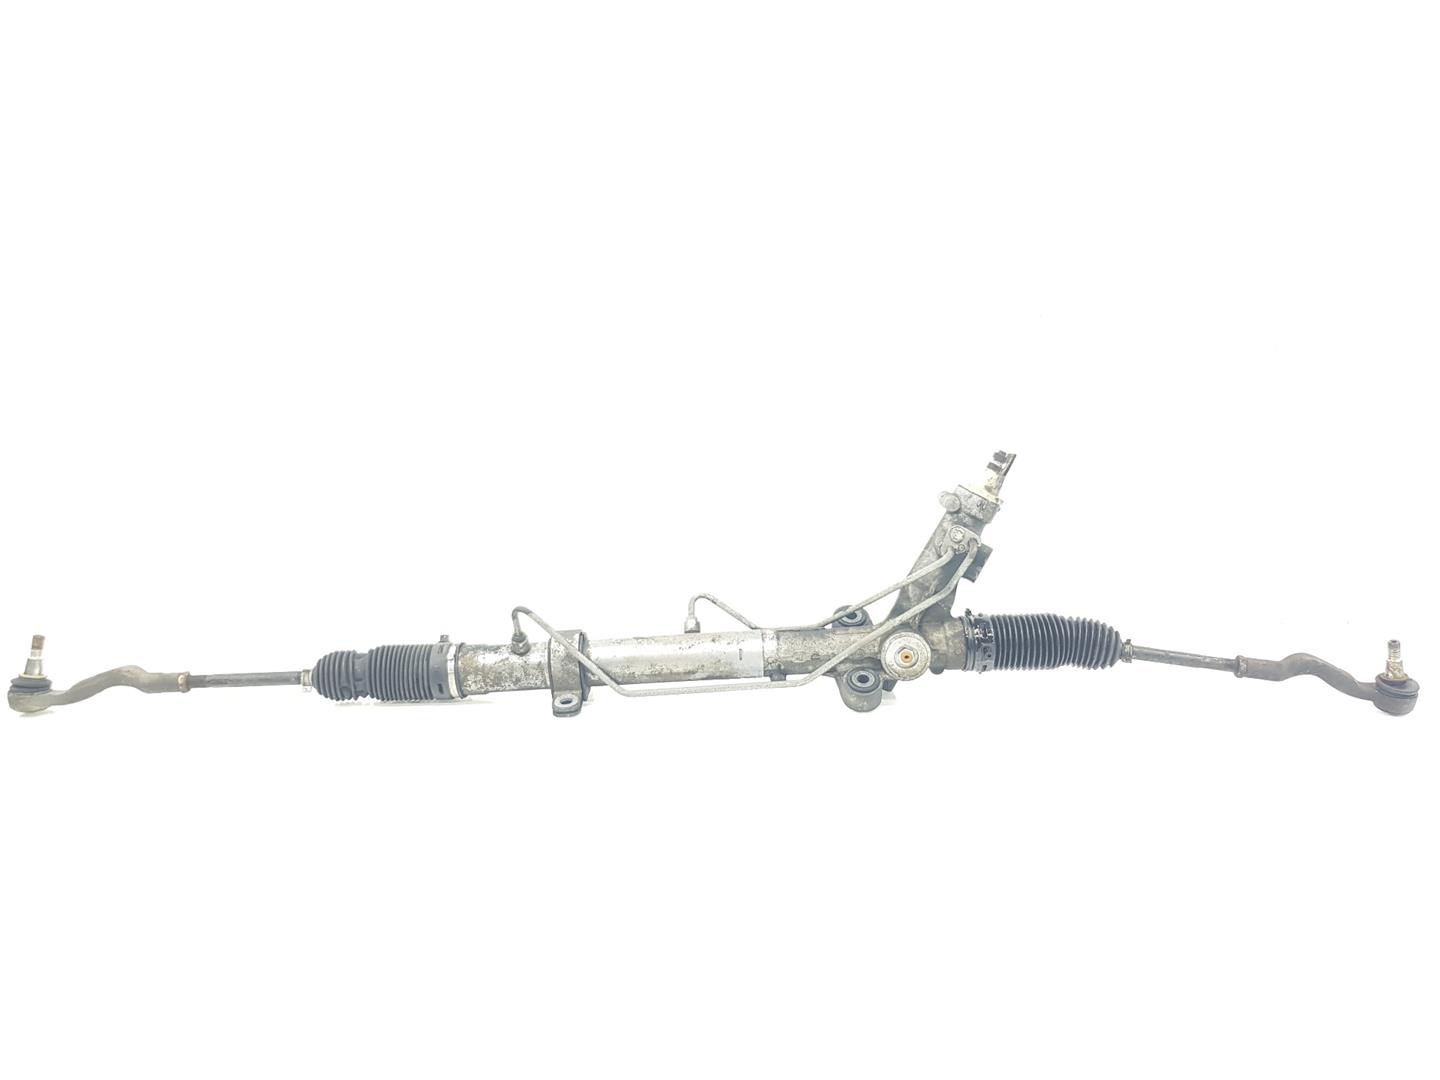 MERCEDES-BENZ Vito W639 (2003-2015) Steering Rack R63911011016, A6394601600 23501649